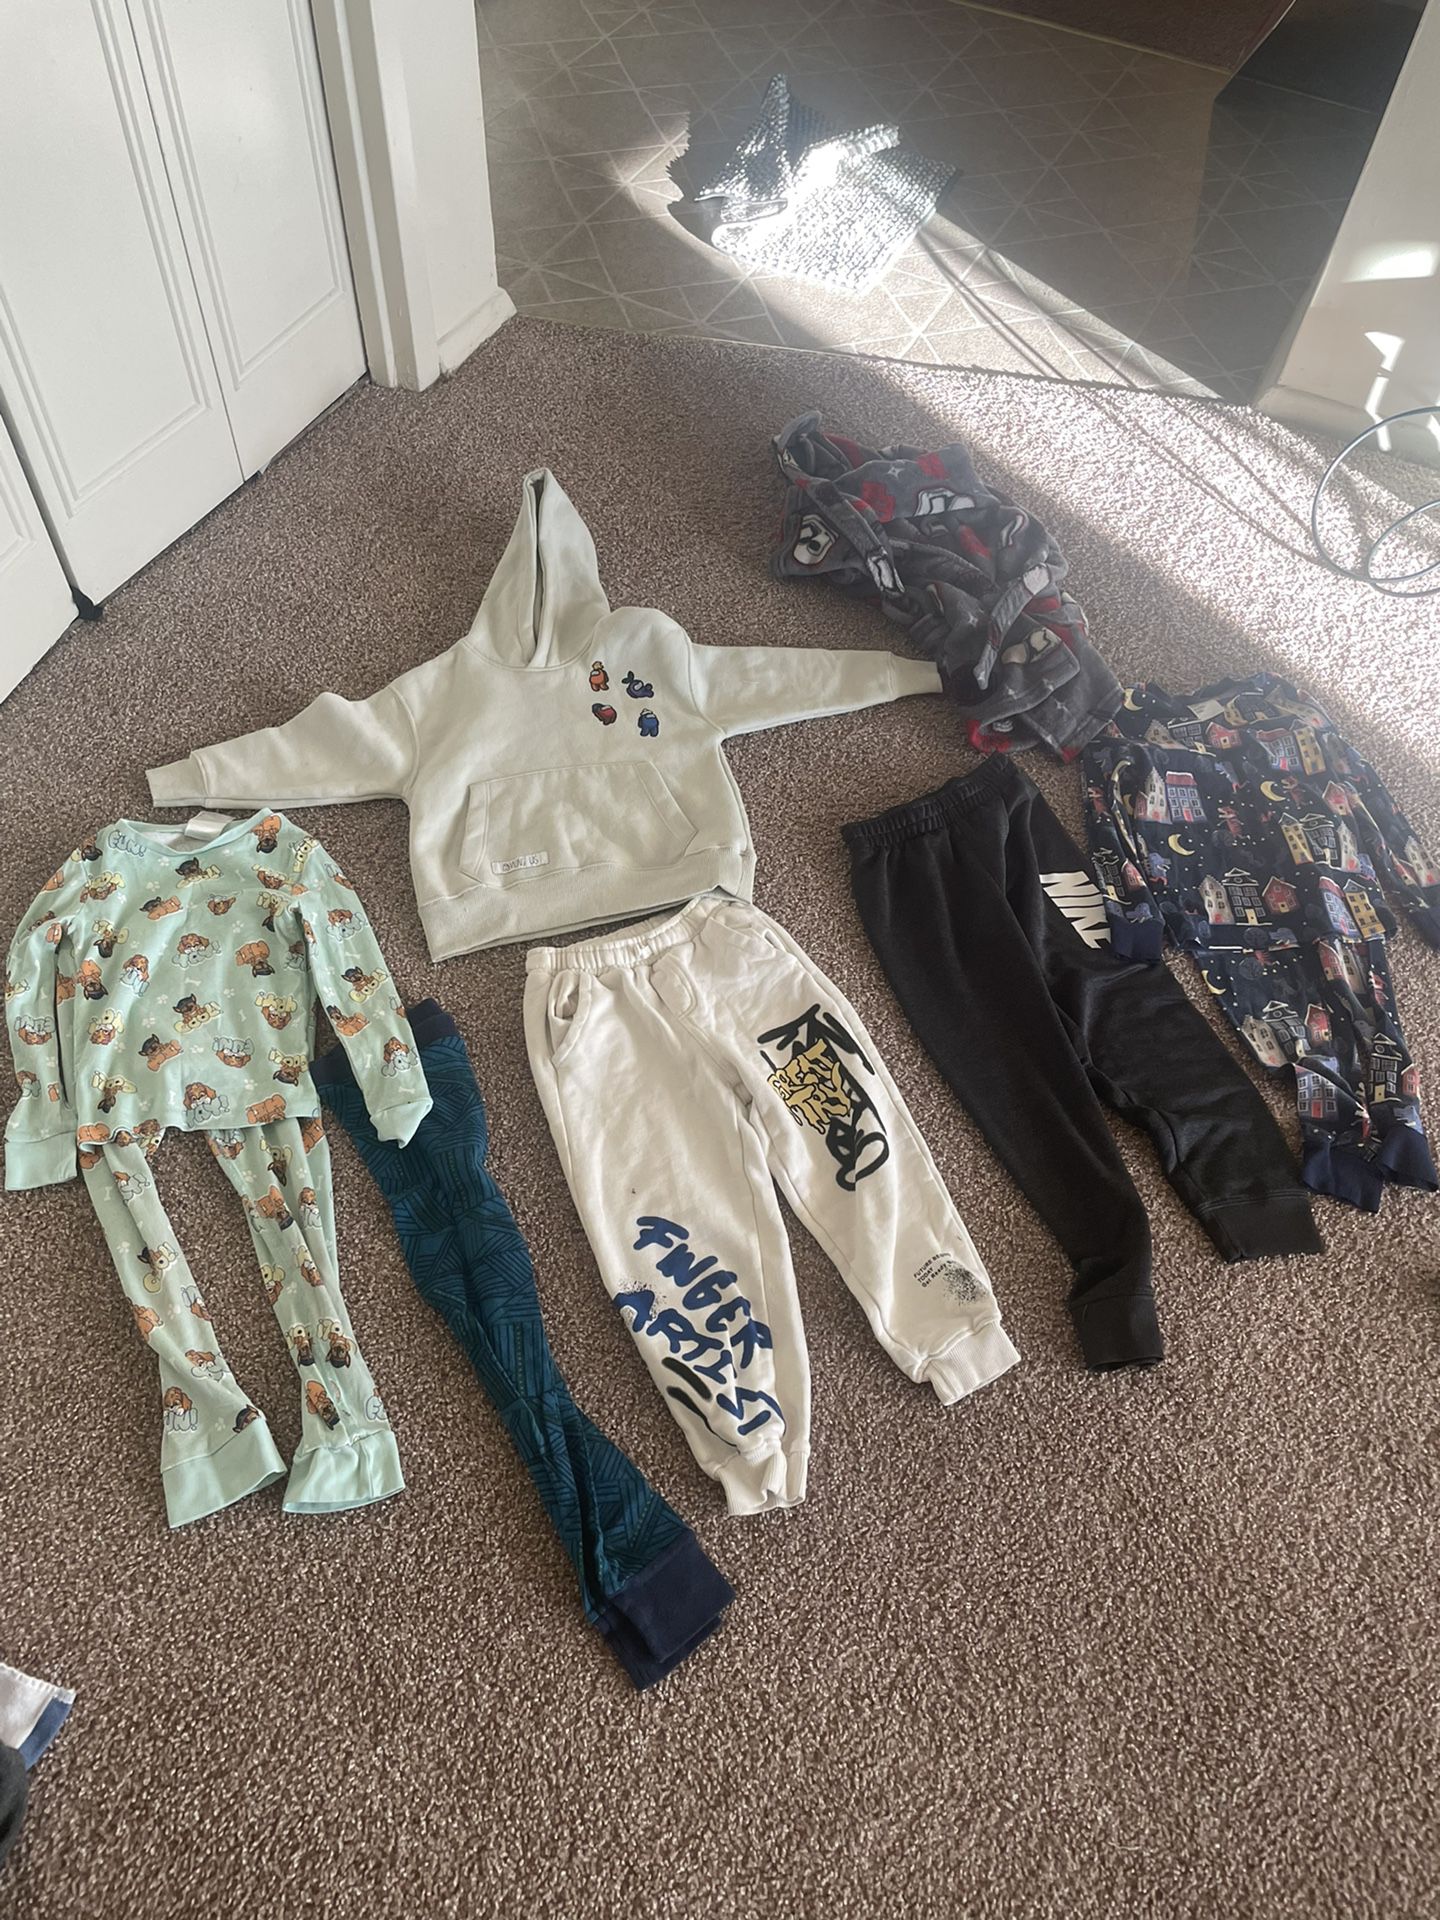 Kid Boy Sweatpants Sweater Pajamas And Robe Size 7 everything for 30.00